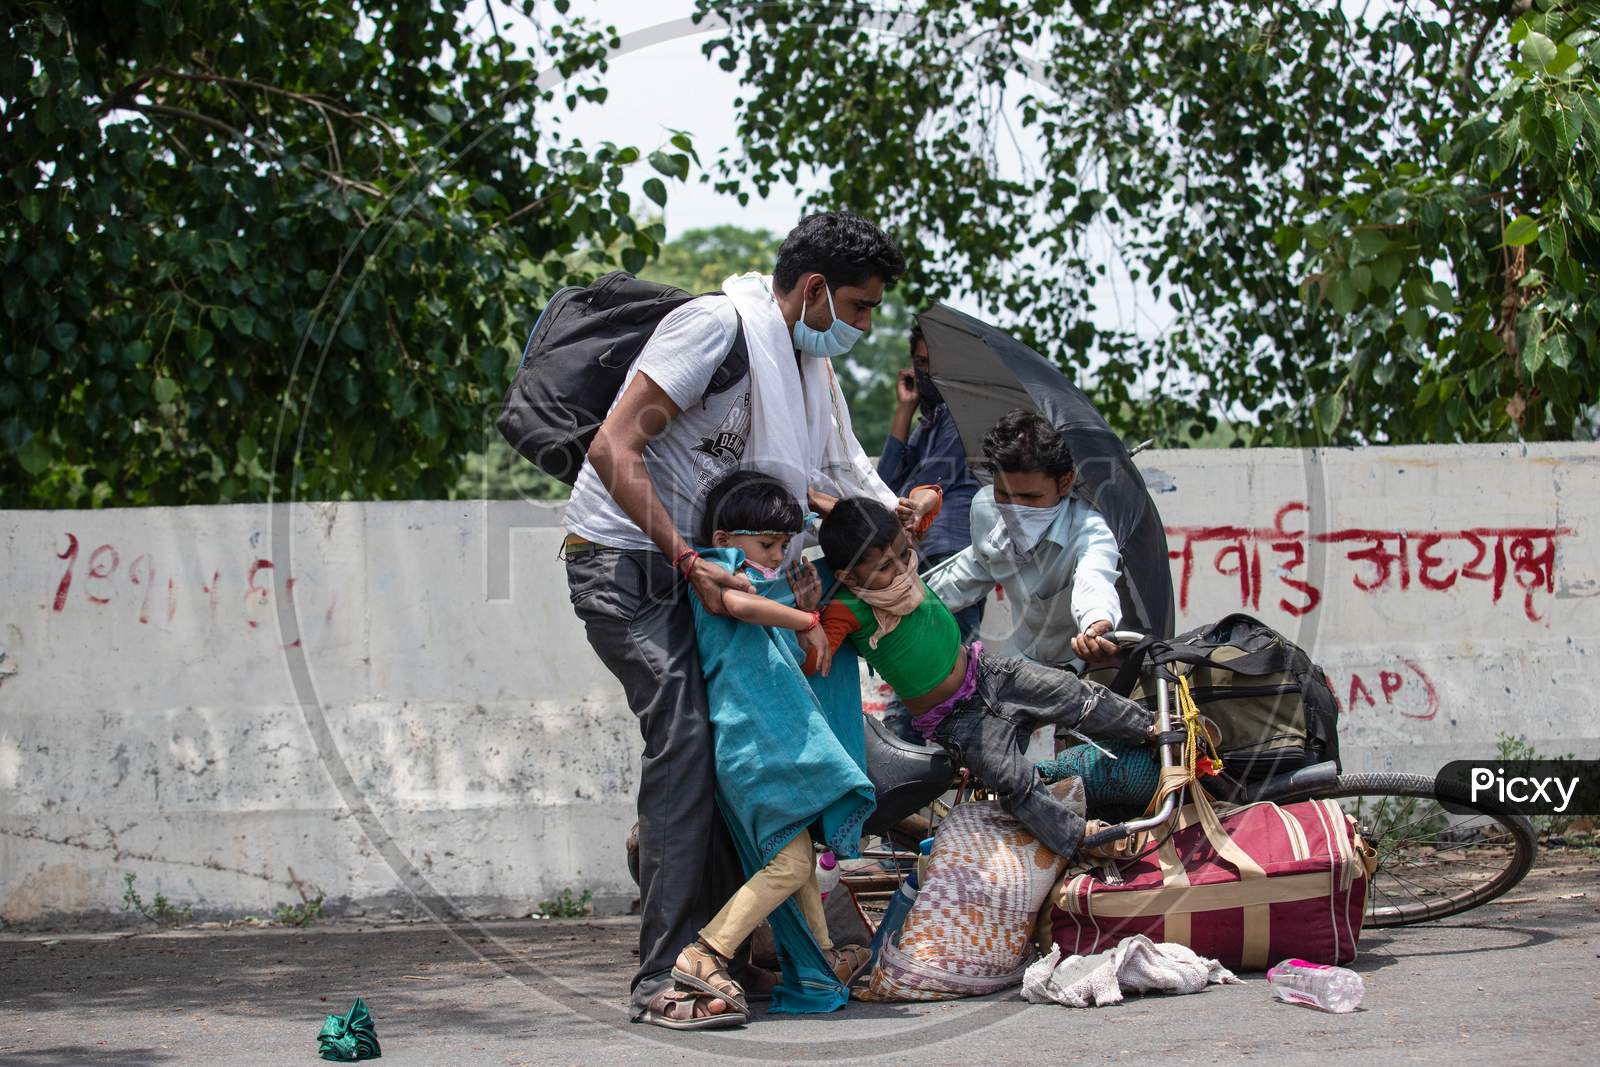 Migrant Worker Kamlesh Lost His Balance While Peddling Back To His Village In Sagar District Of Madhya Pradesh With His Children Anushka 7, And Krishna, 4, In New Delhi, India, On May 11, 2020.Distance Between New Delhi To Sagar Is Approximately 680 Kilometres.